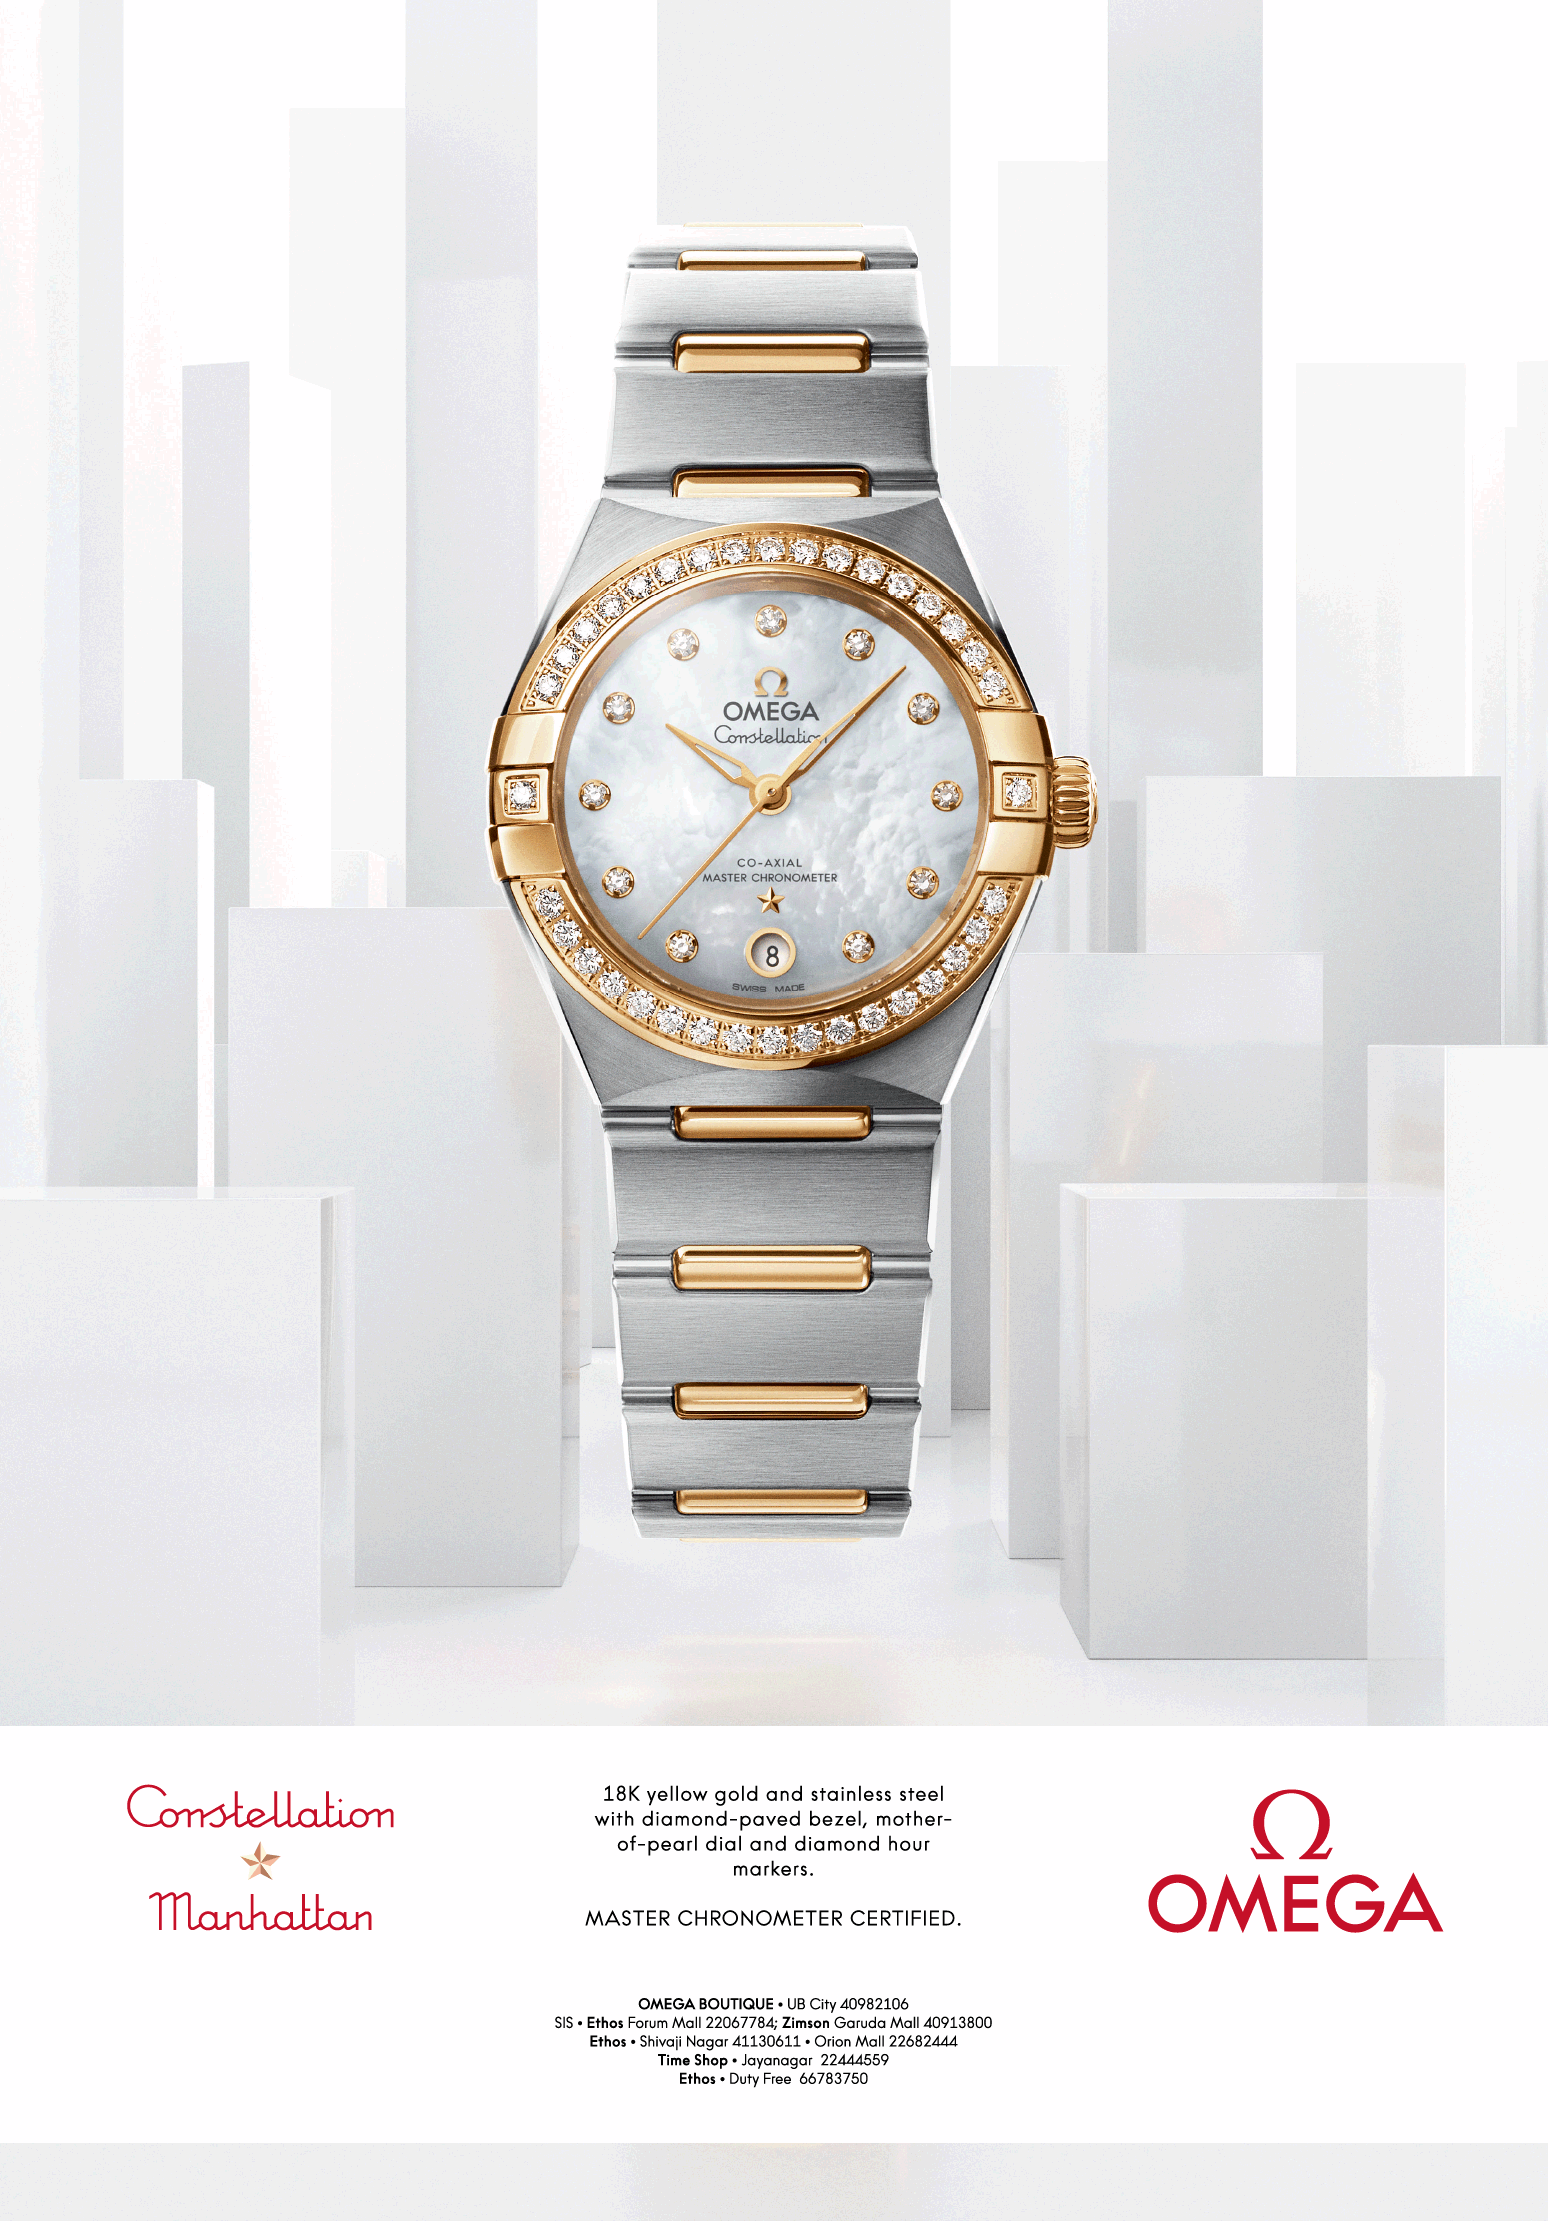 omega-watches-master-chronograph-certified-ad-times-of-india-bangalore-17-05-2019.png